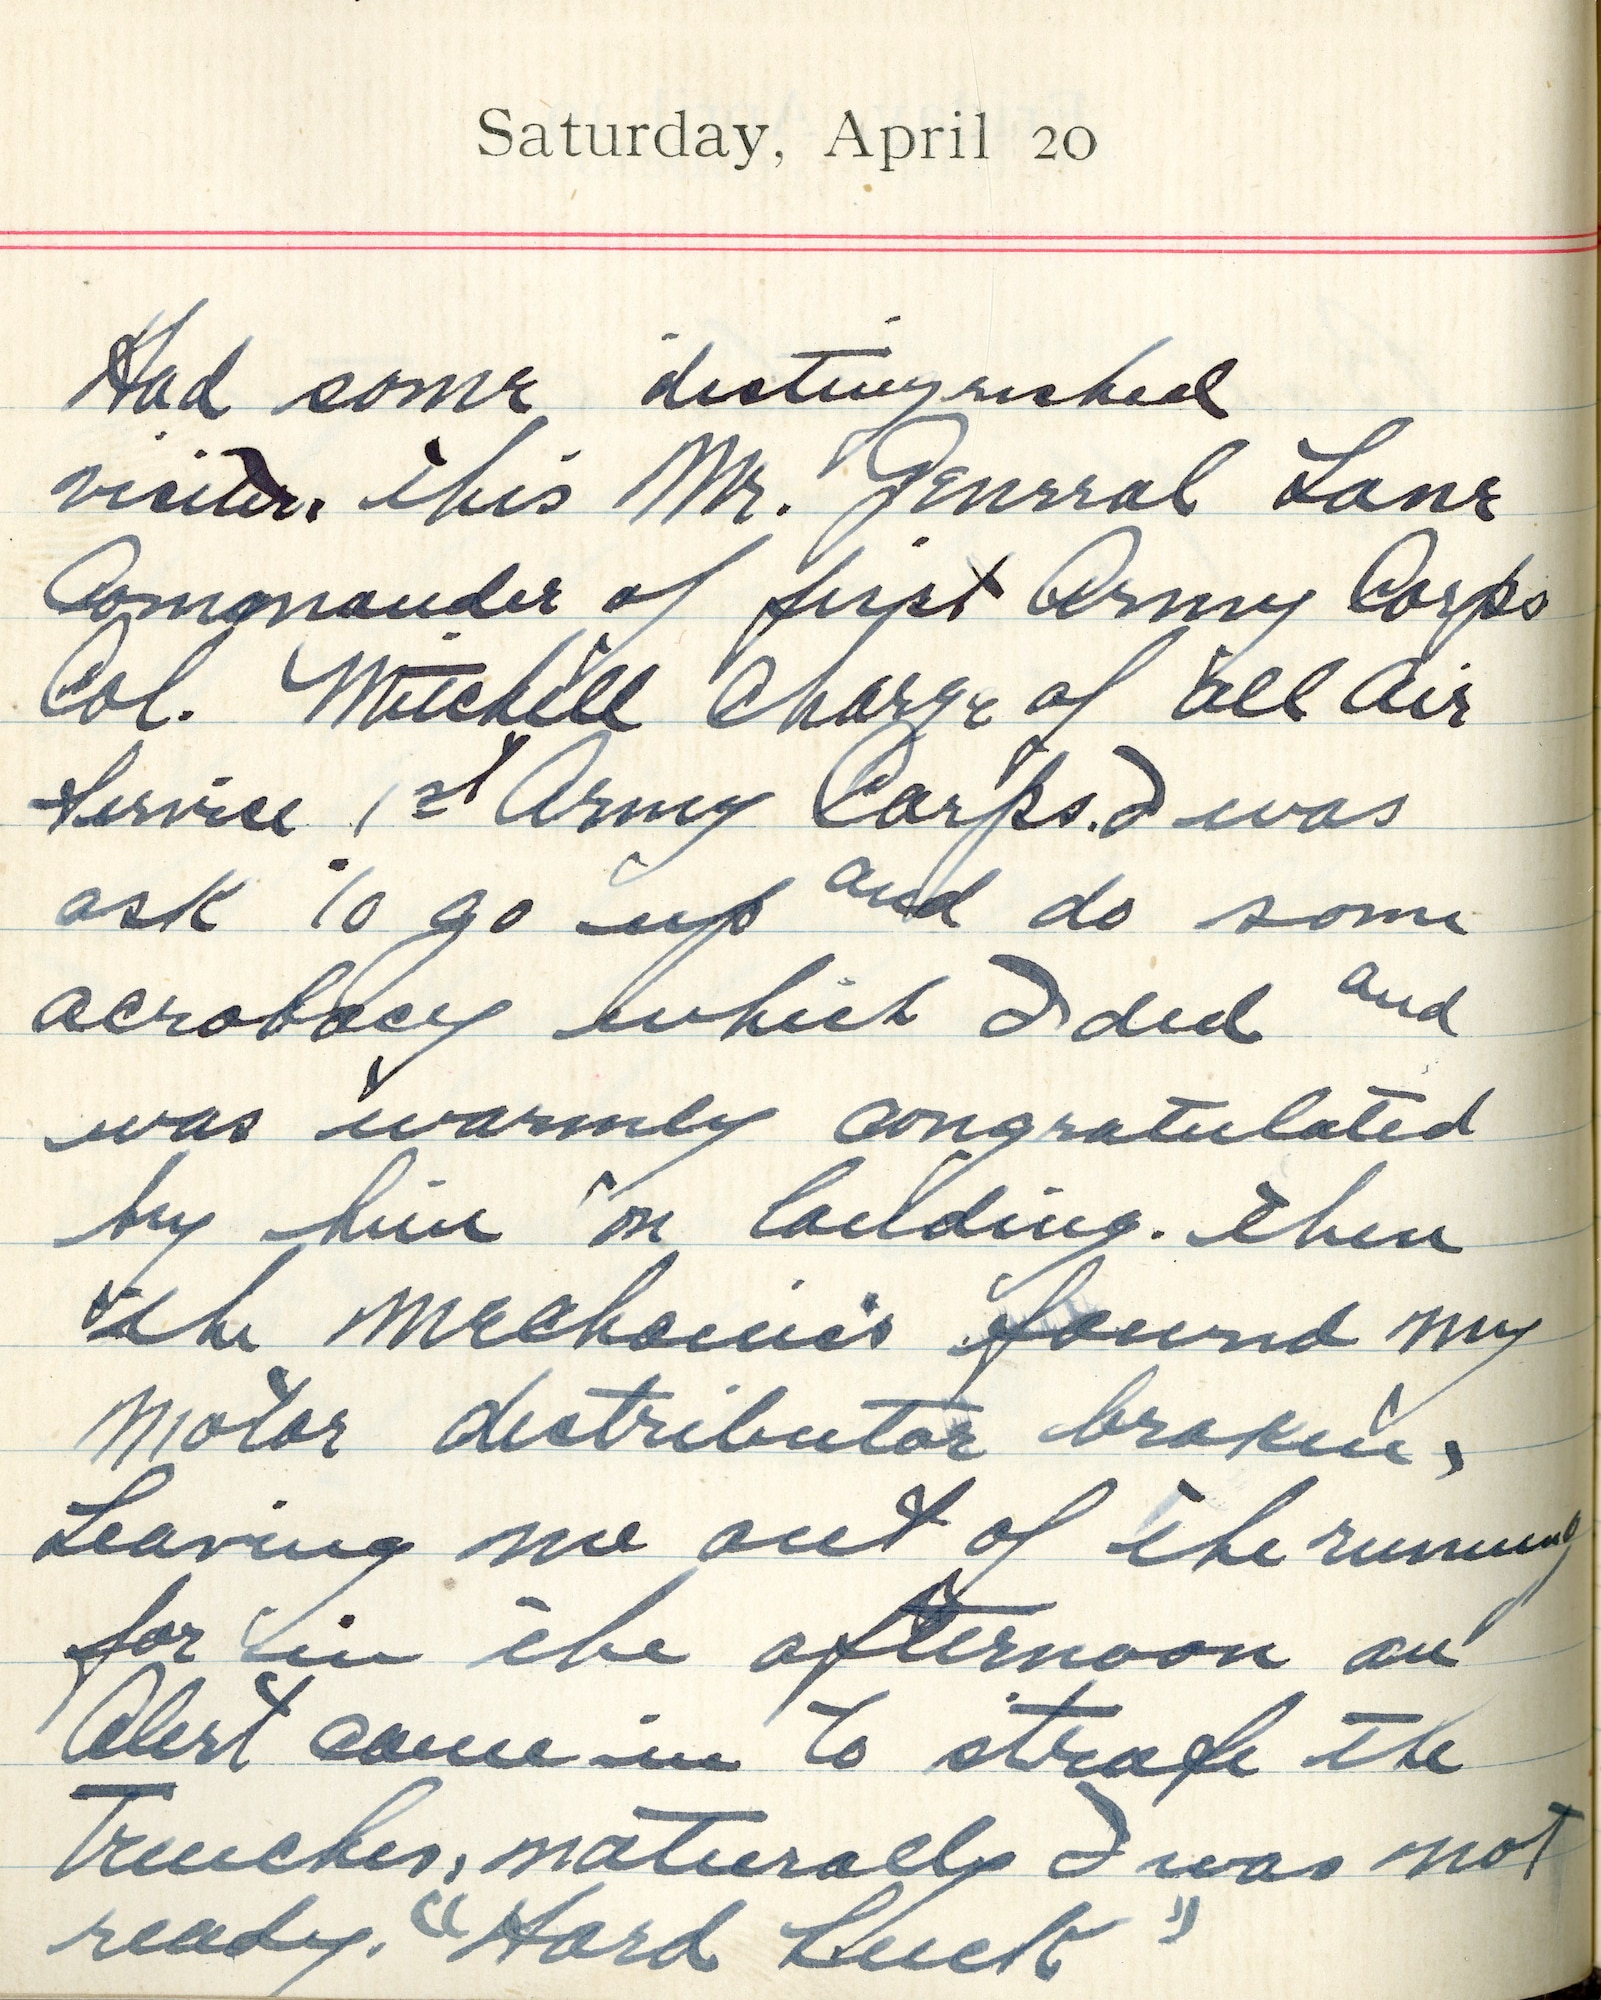 Capt. Edward V. Rickenbacker's 1918 wartime diary entry. (04/20/1918). Had some distinguished visitors this morning.  General Lane [sic] Commander of First Army Corps, Col. Mitchell, [in] charge of all Air Service, 1st Army Corps.  I was ask[ed] to go up and do some acrobacy which I did and was warmly congratulated by him on landing.  Then the mechanics found my motor distributor broken, leaving me out of the running for in the afternoon.  An alert came in to strafe the trenches, naturally I was not ready.  “Hard Luck”